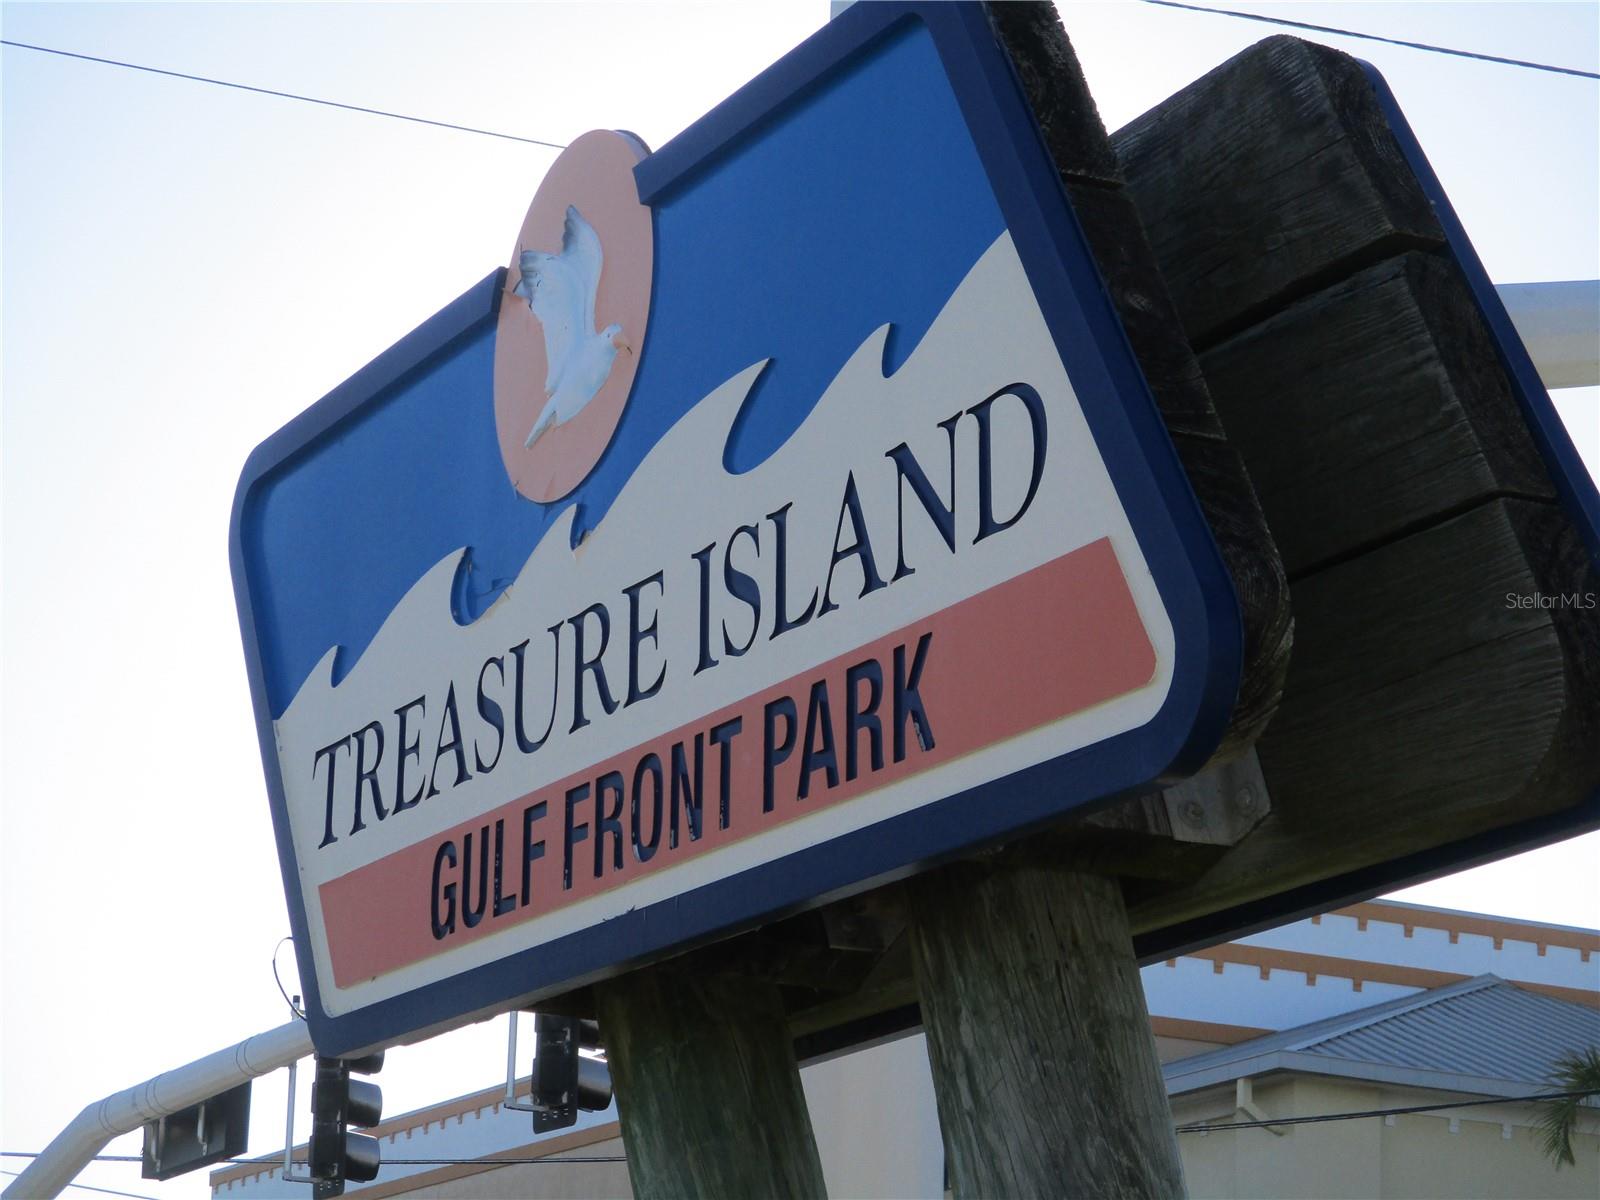 Right across the road. As an owner of a property in Treasure Island you may, for a small fee, receive a beach parking pass from the City of Treaure Island.